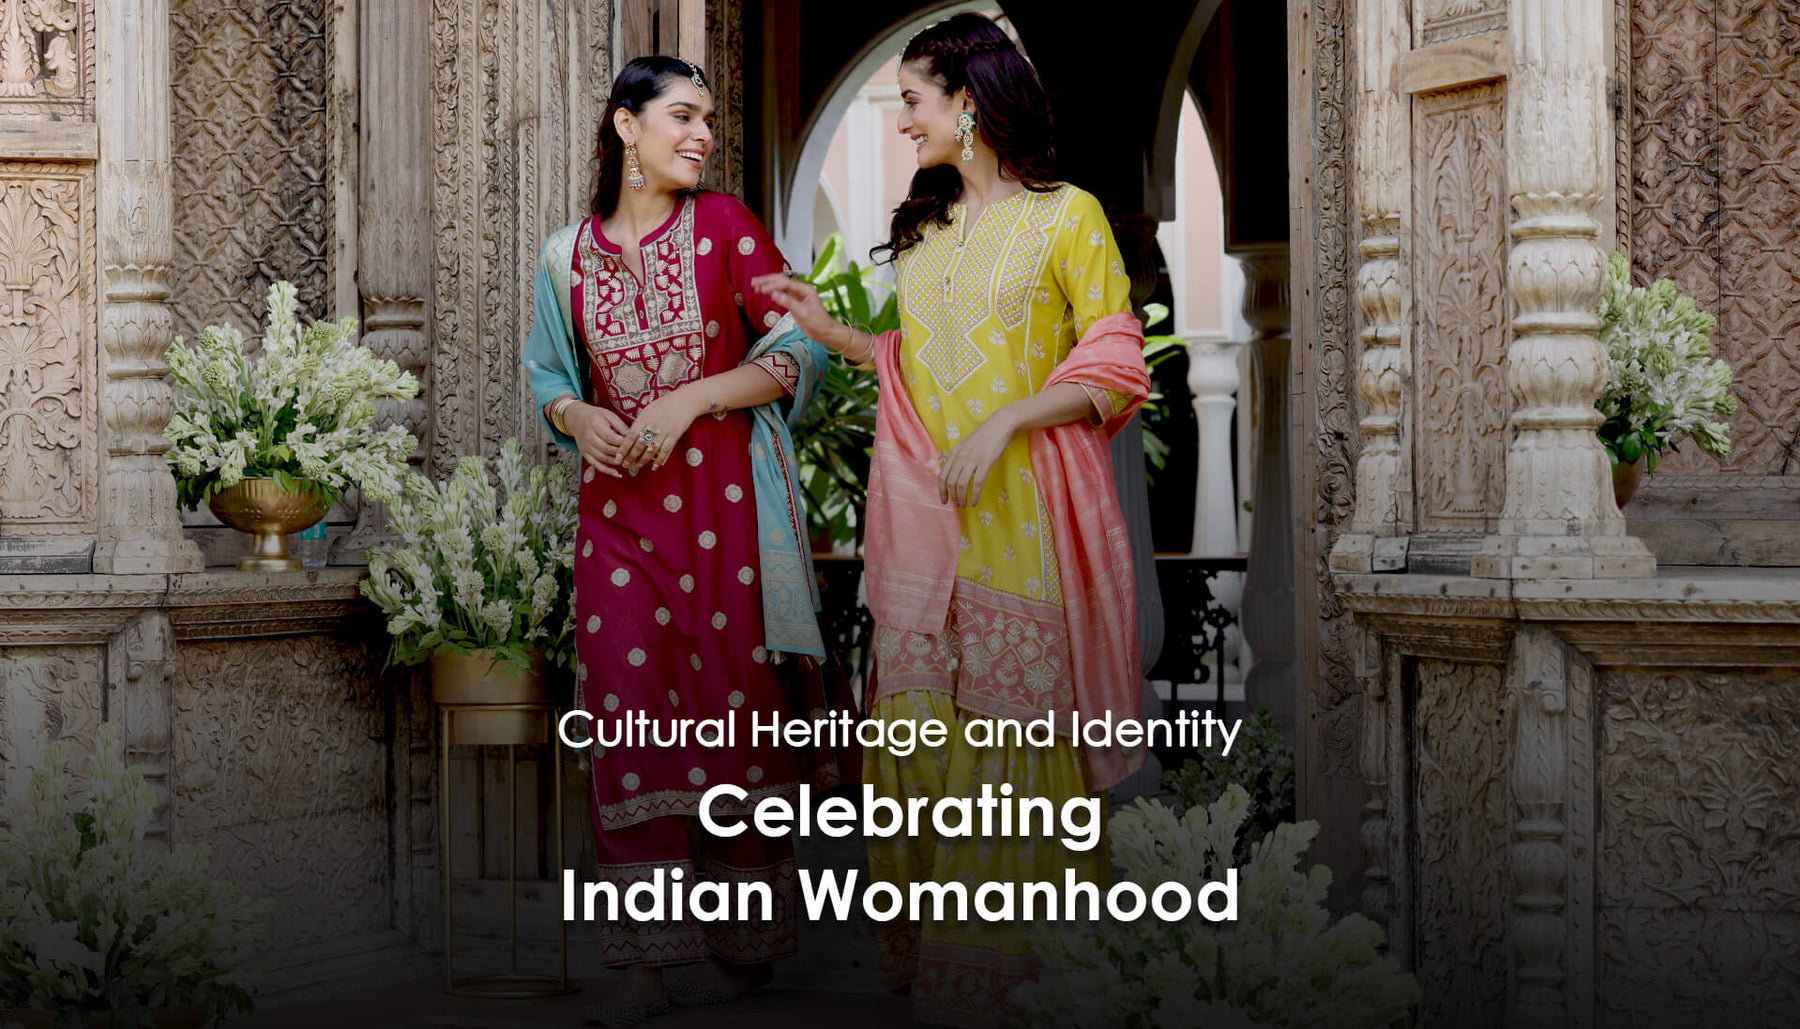 Cultural Heritage And Identity: Celebrating Indian Womanhood